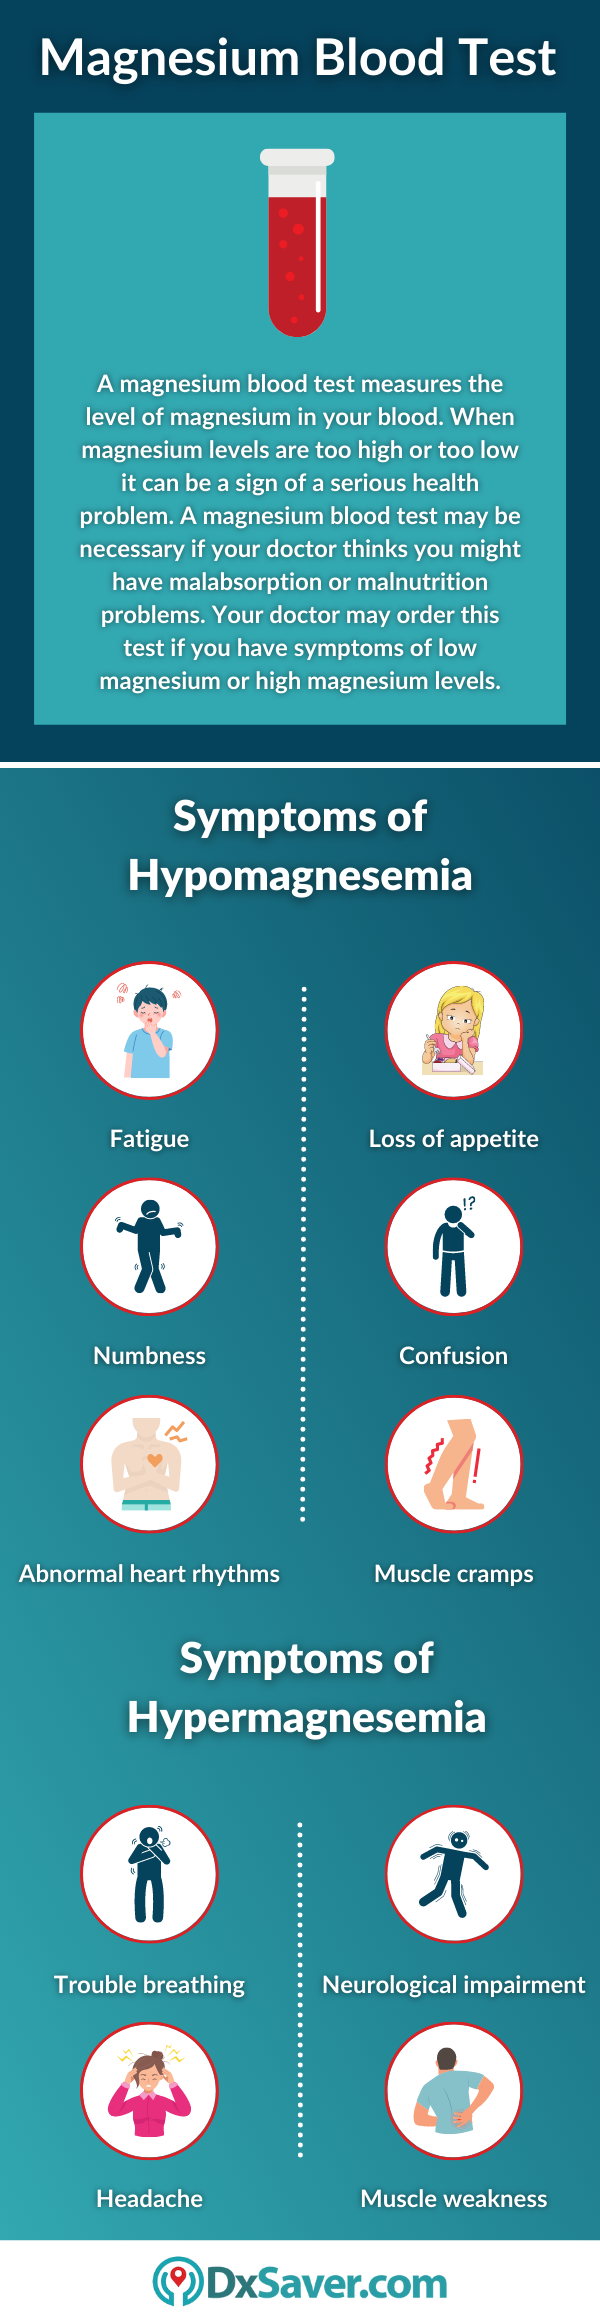 Magnesium Blood Test and Symptoms of Hypomagnesemia & Hypermagnesemia